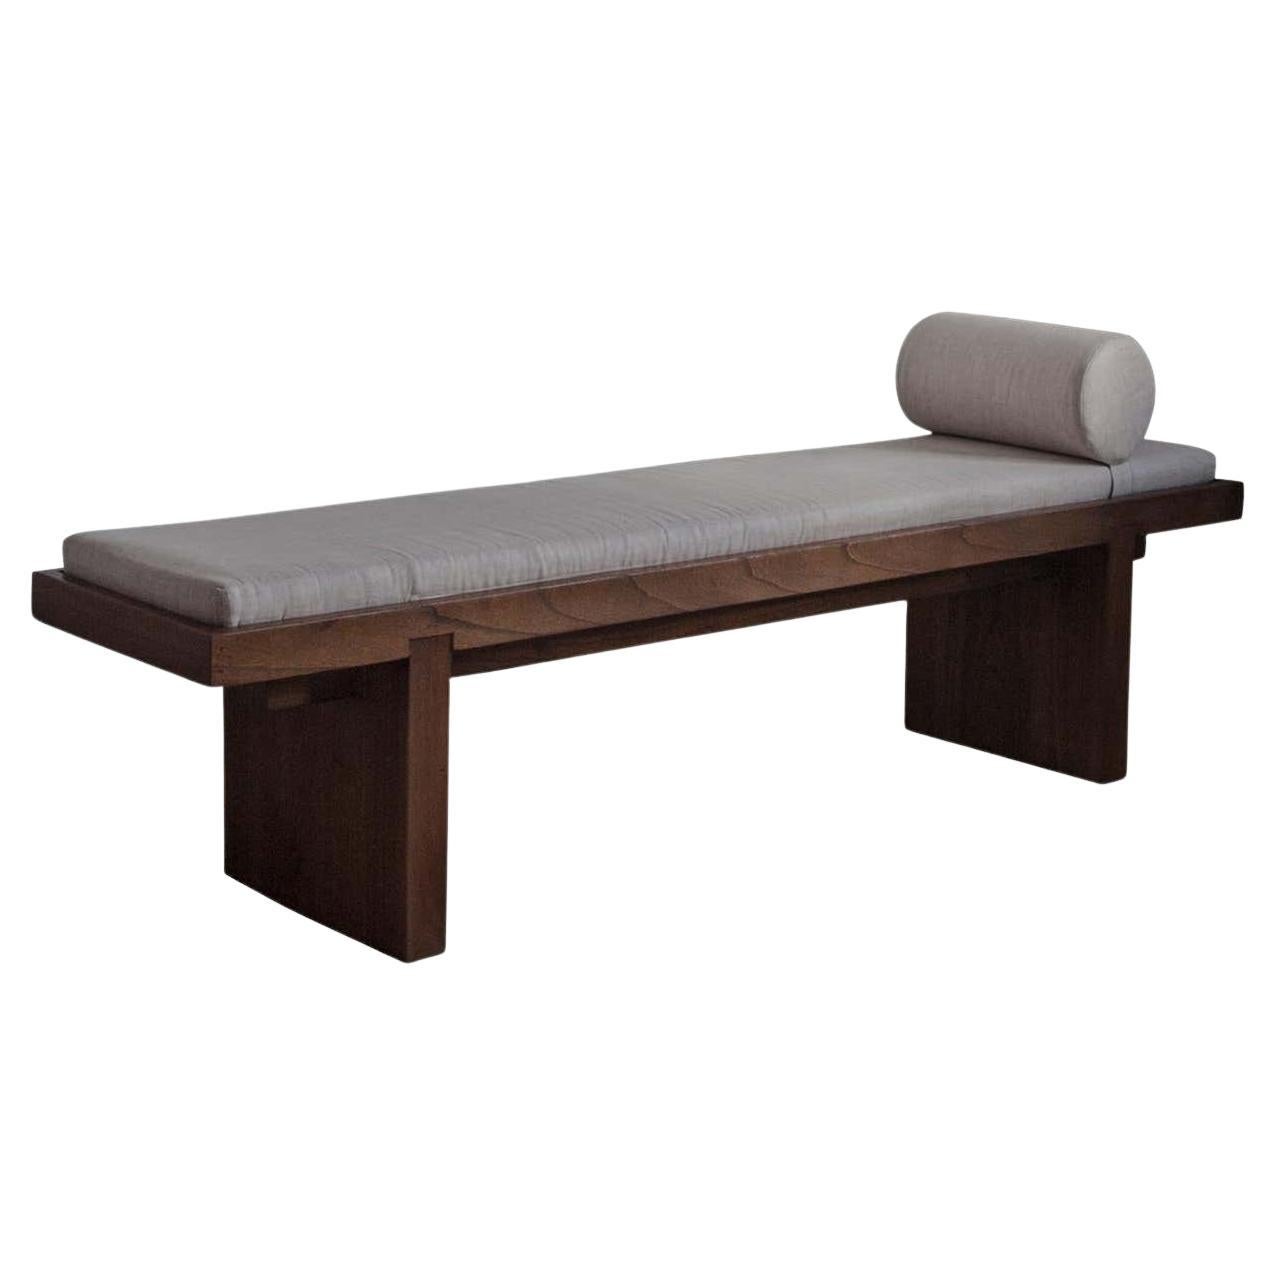 Set of 3 Day Bench, Pillow & Headrest by Bicci De Medici For Sale